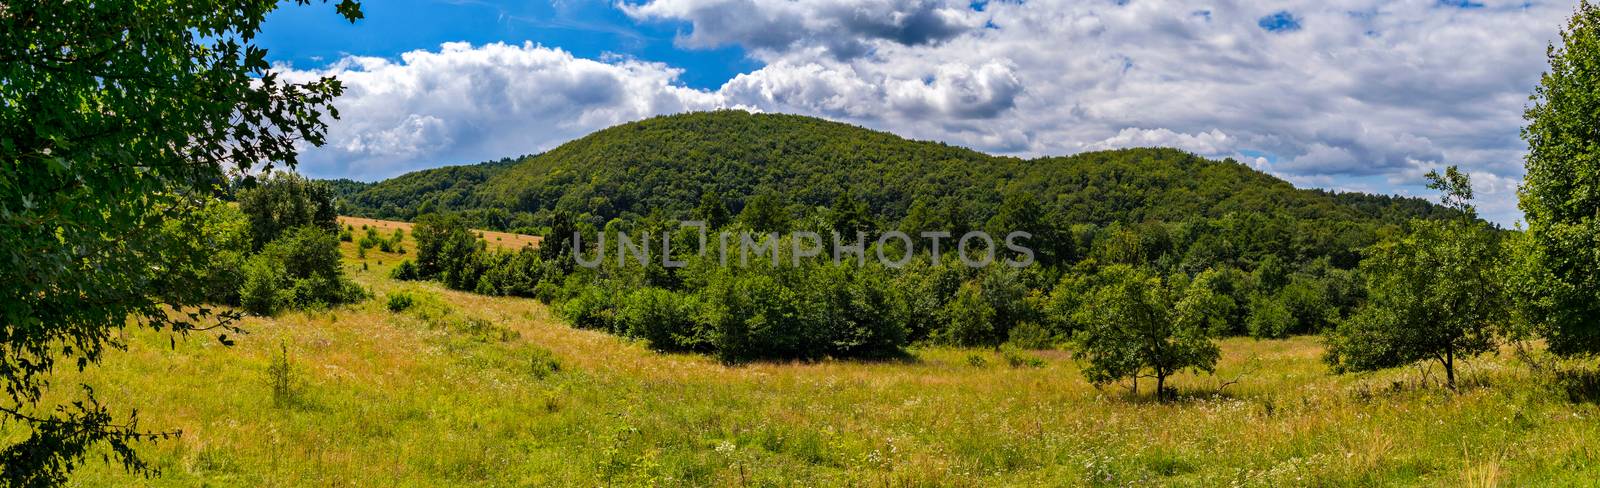 mountain, covered with green trees, under a blue sky with clouds